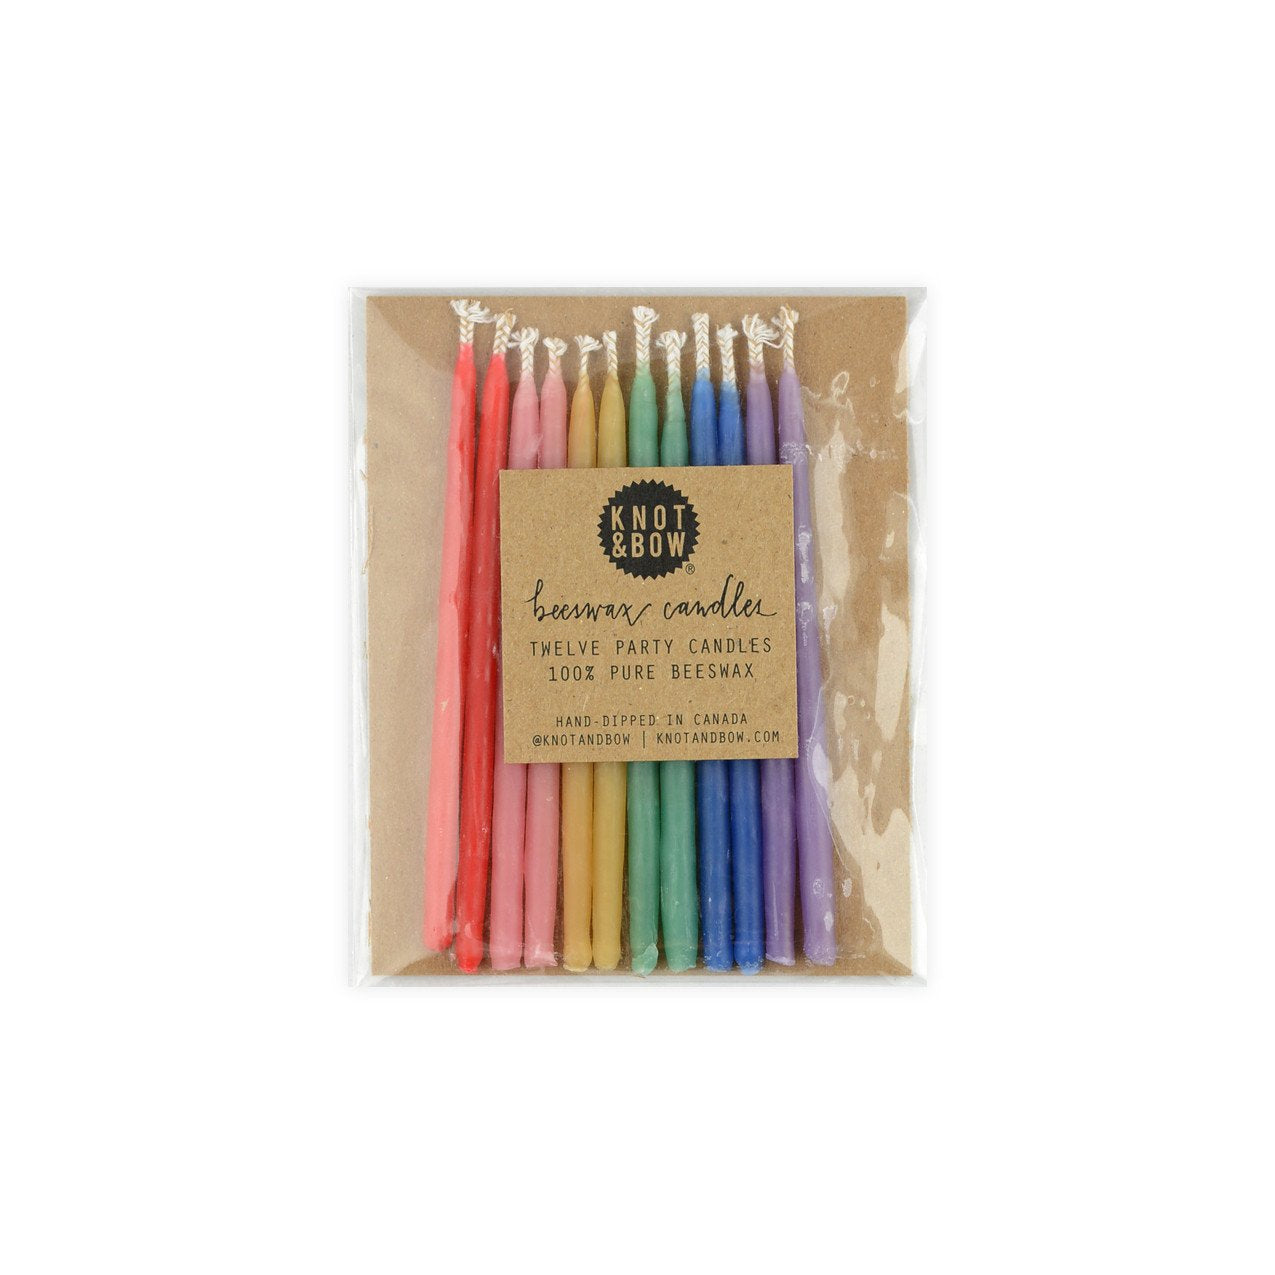 Hand-Dipped Beeswax Birthday Candles Rainbow